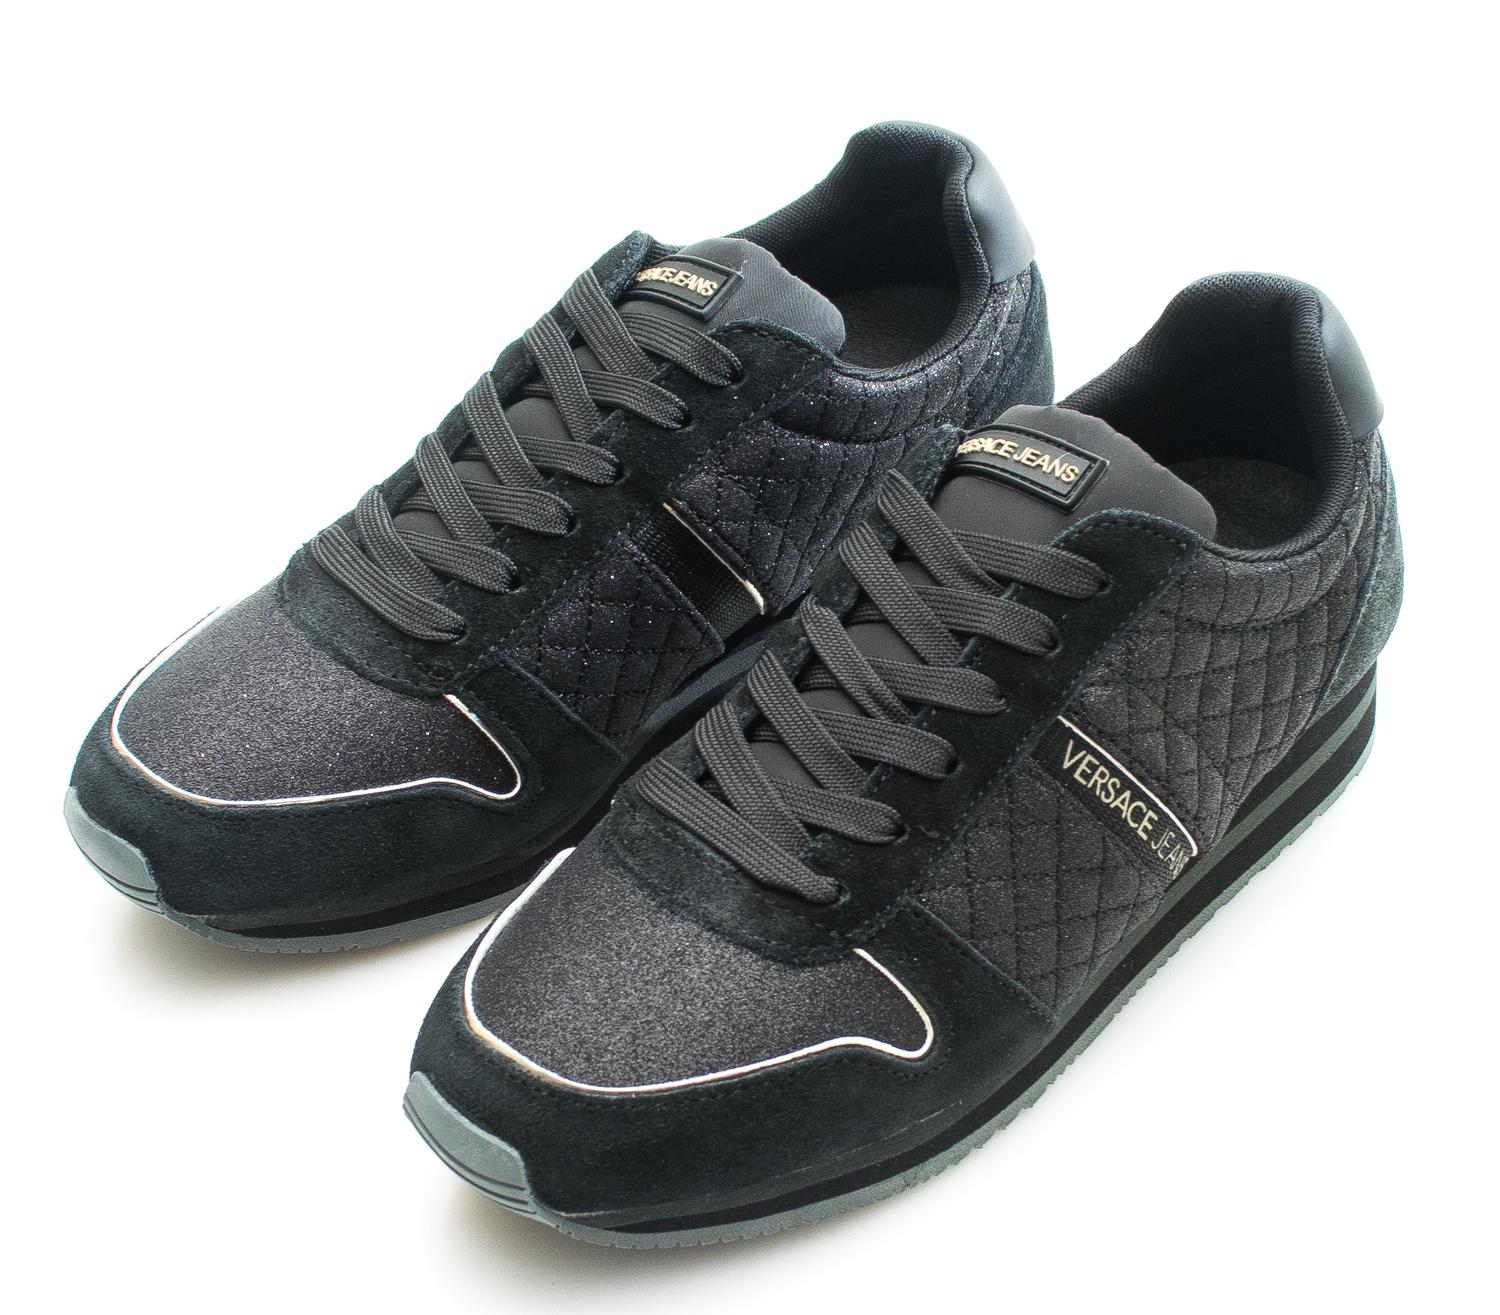 Versace Jeans Sneakers In Glittery Fabric And Suede Leather Black ...